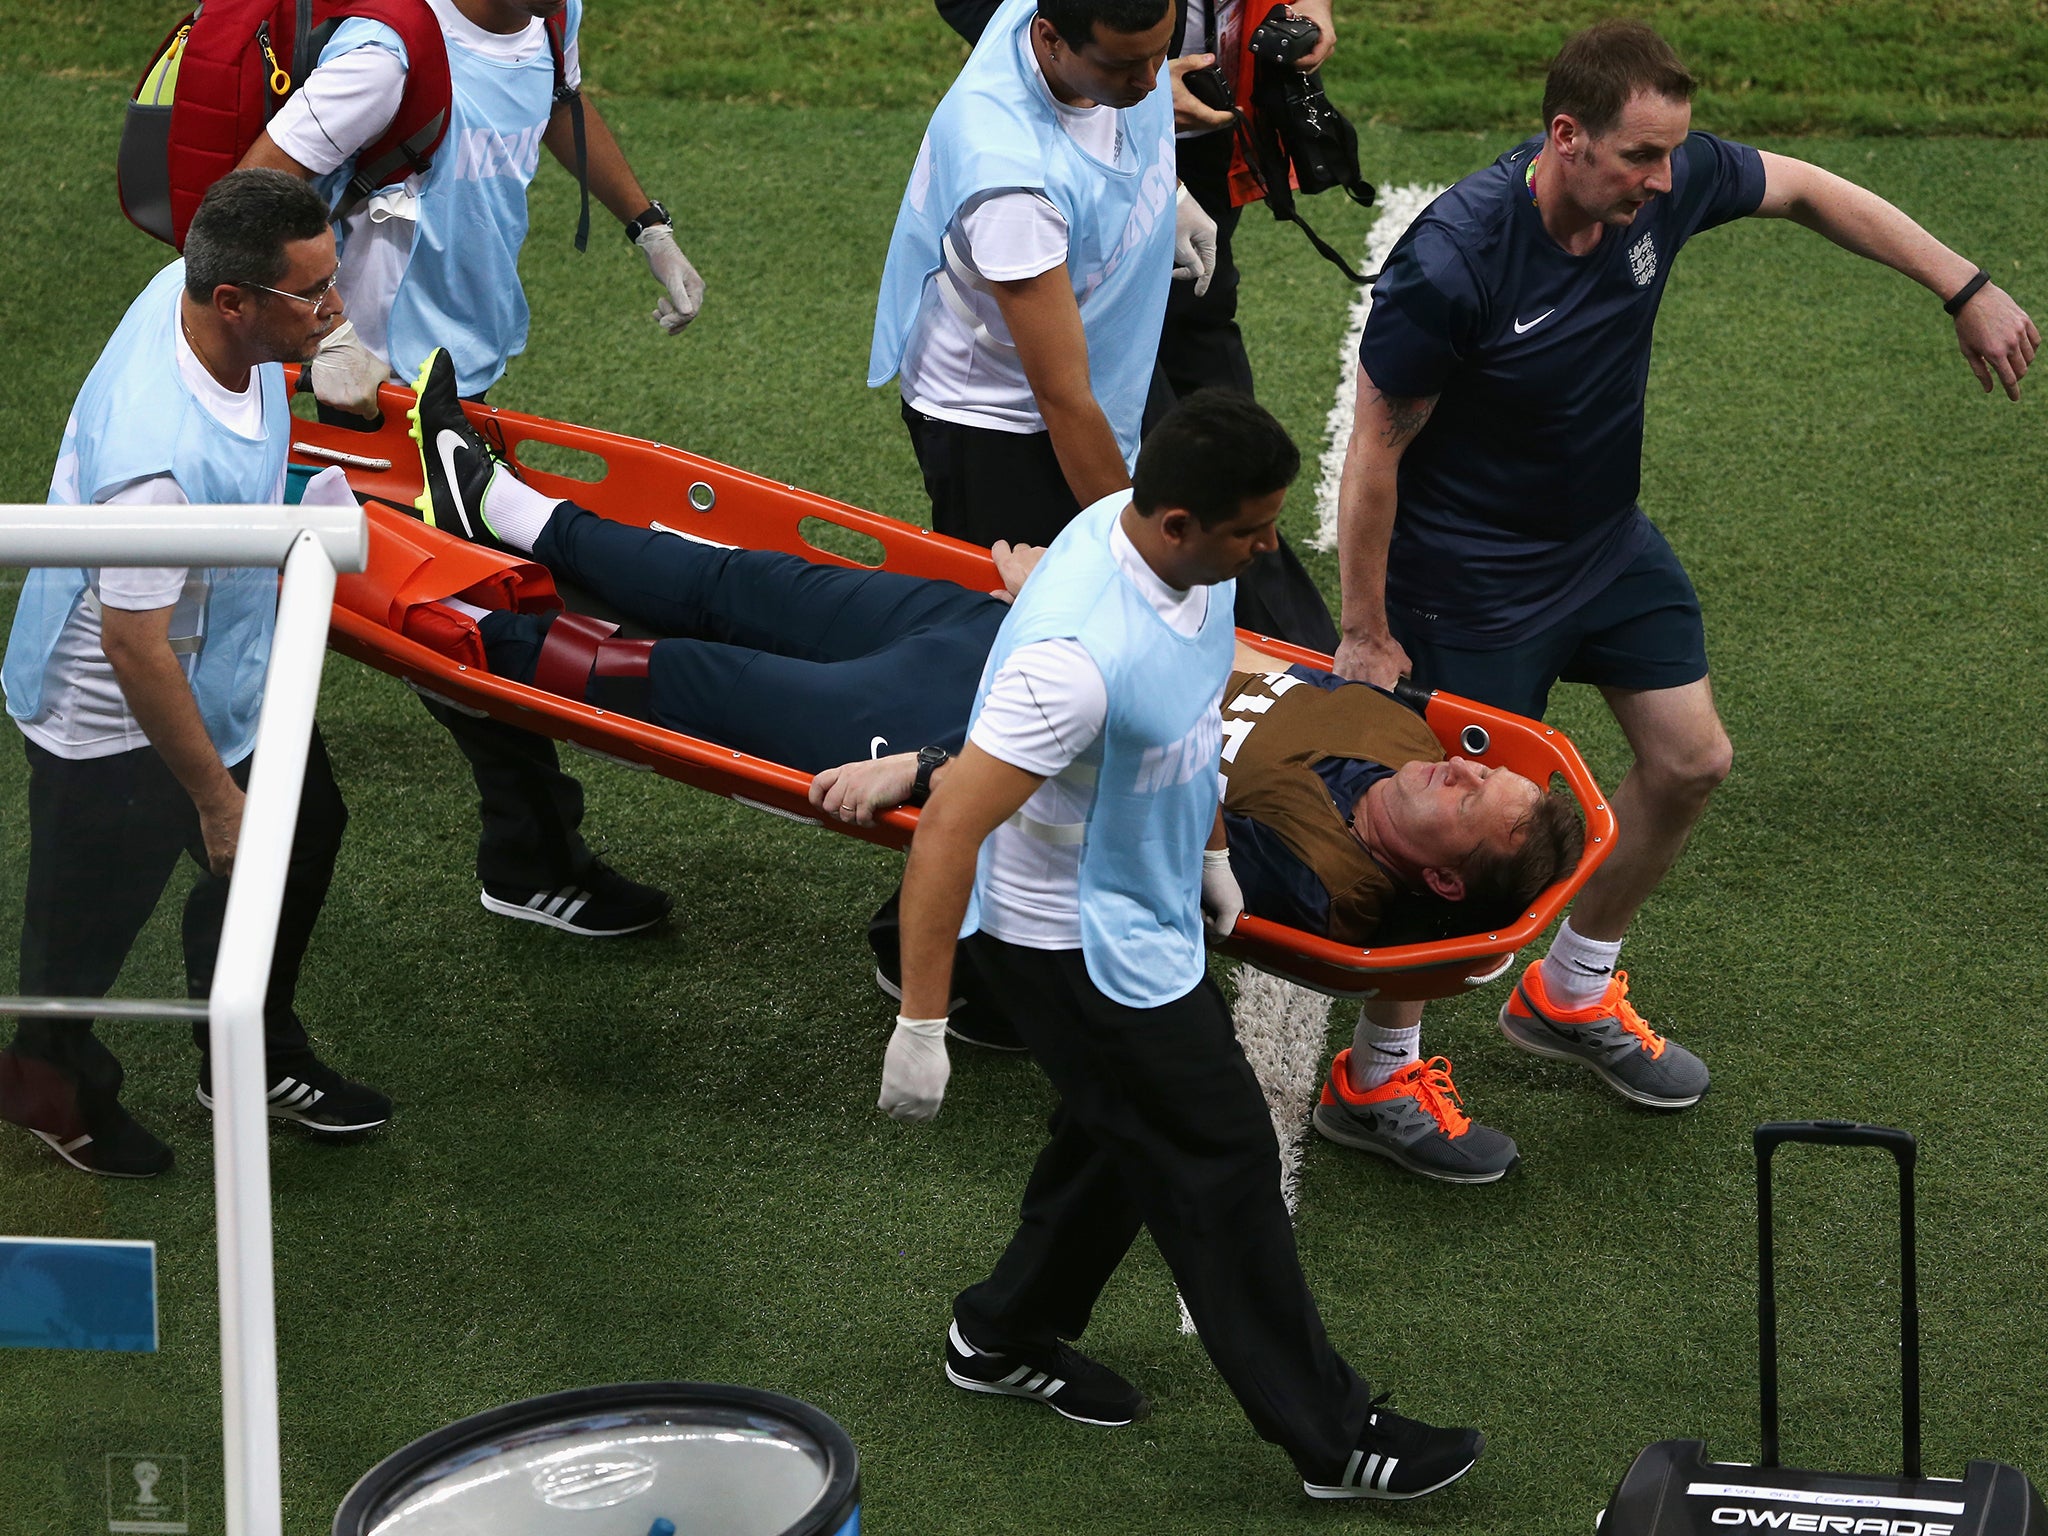 Gary Lewin is stretchered off